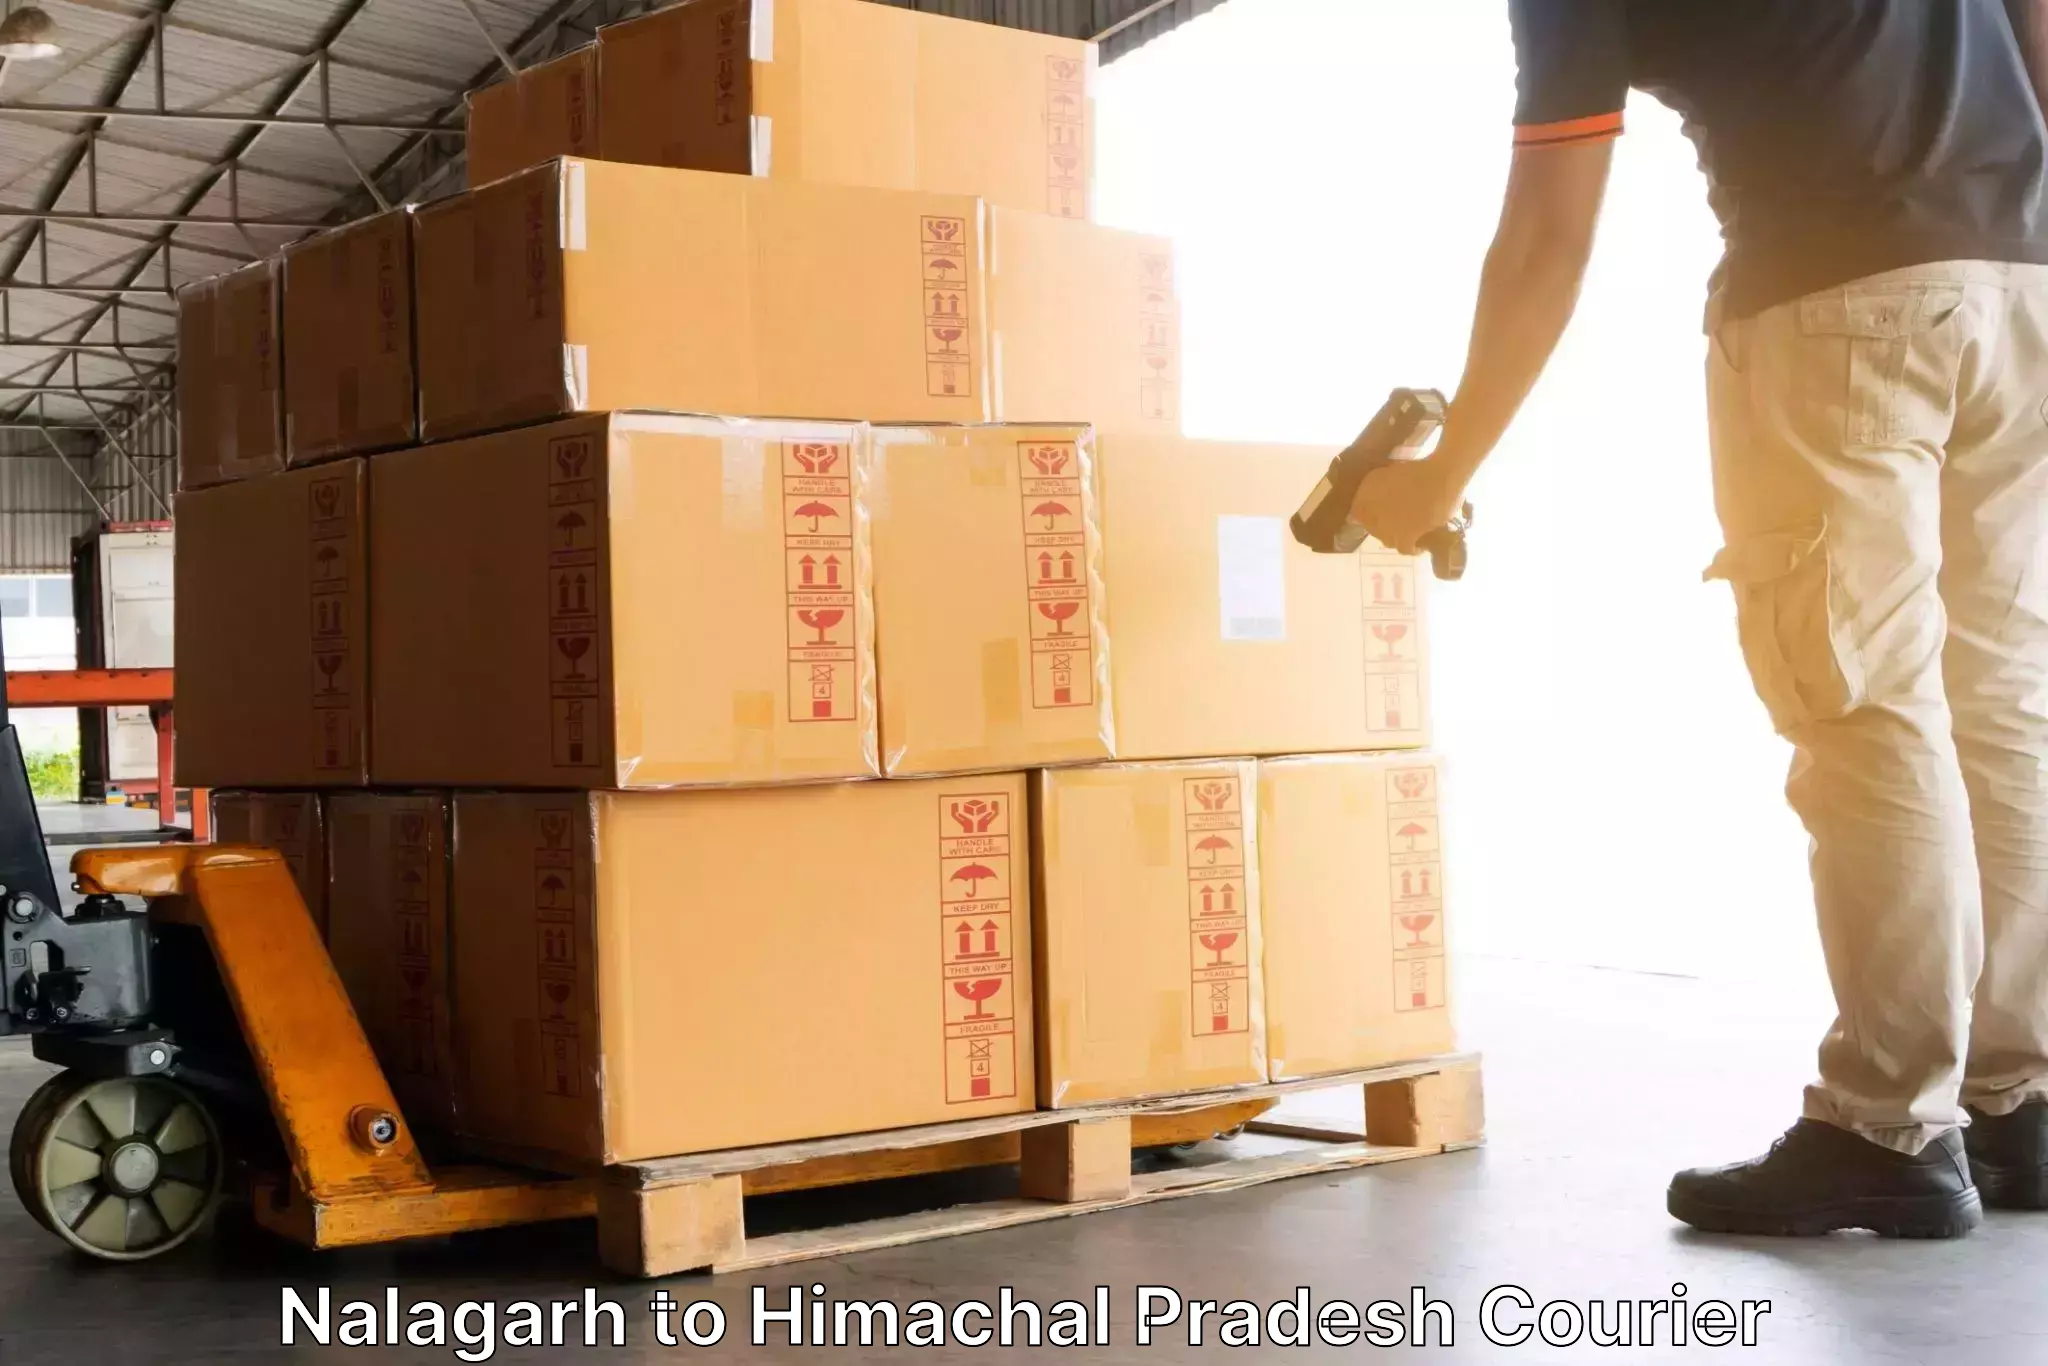 Full-service courier options in Nalagarh to Nalagarh